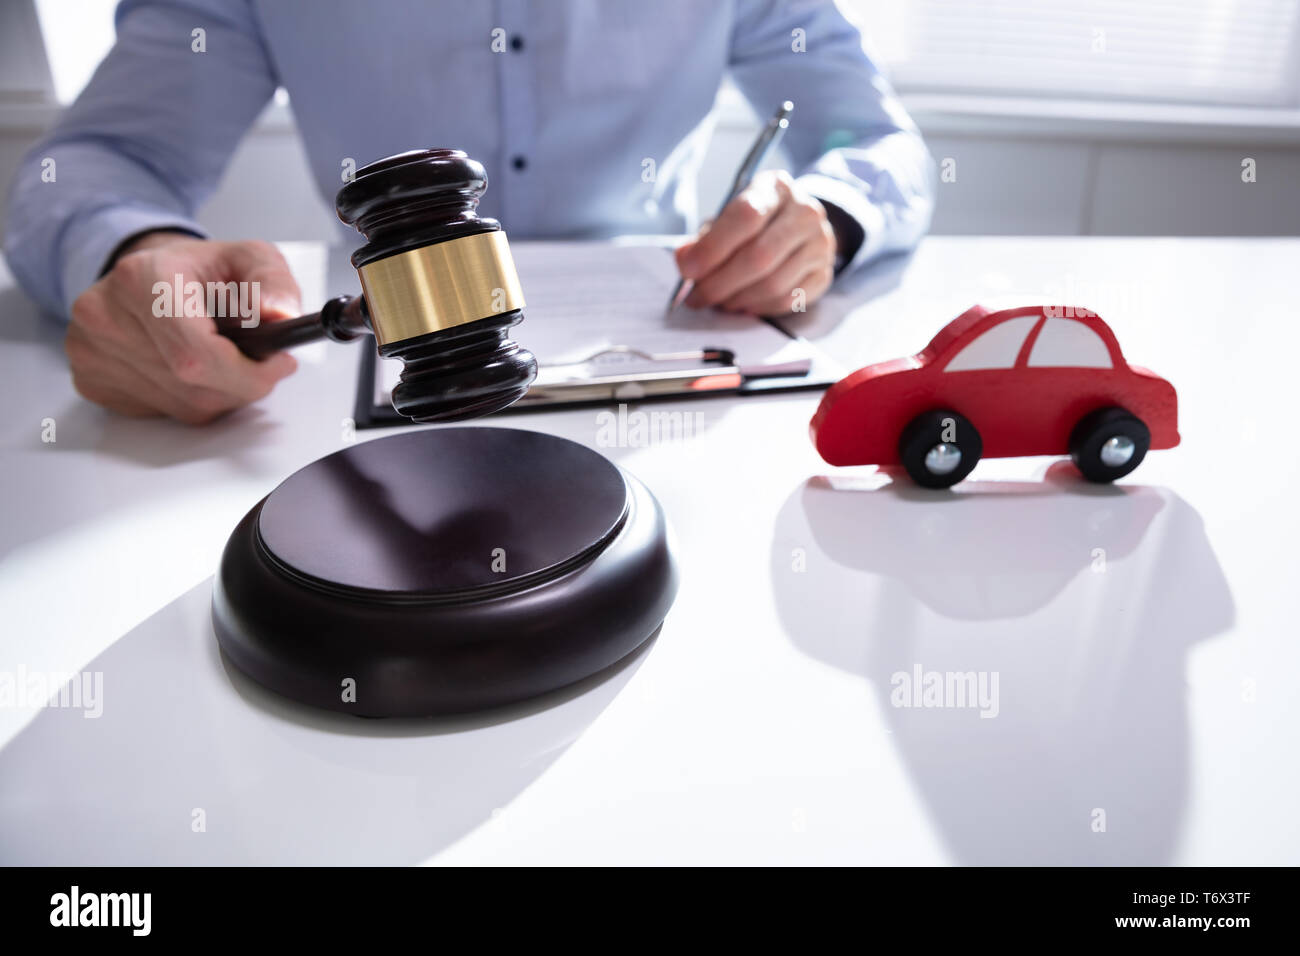 Wooden Toy Car In Front Of Judge Gavel On The Table Background Stock Photo